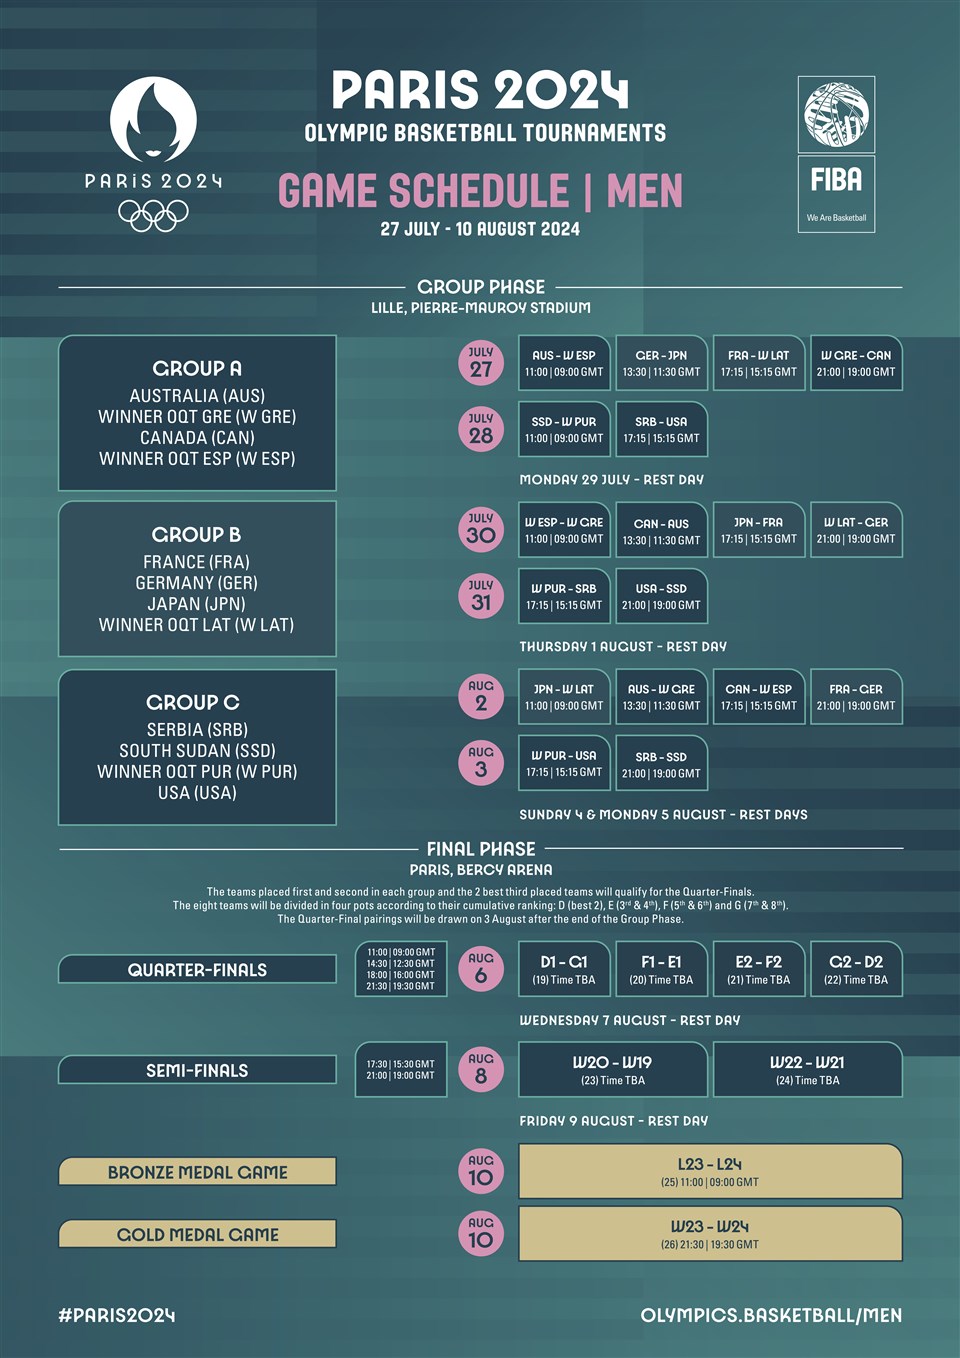 Here Is The Men’s Basketball Schedule At The 2024 Paris Olympics